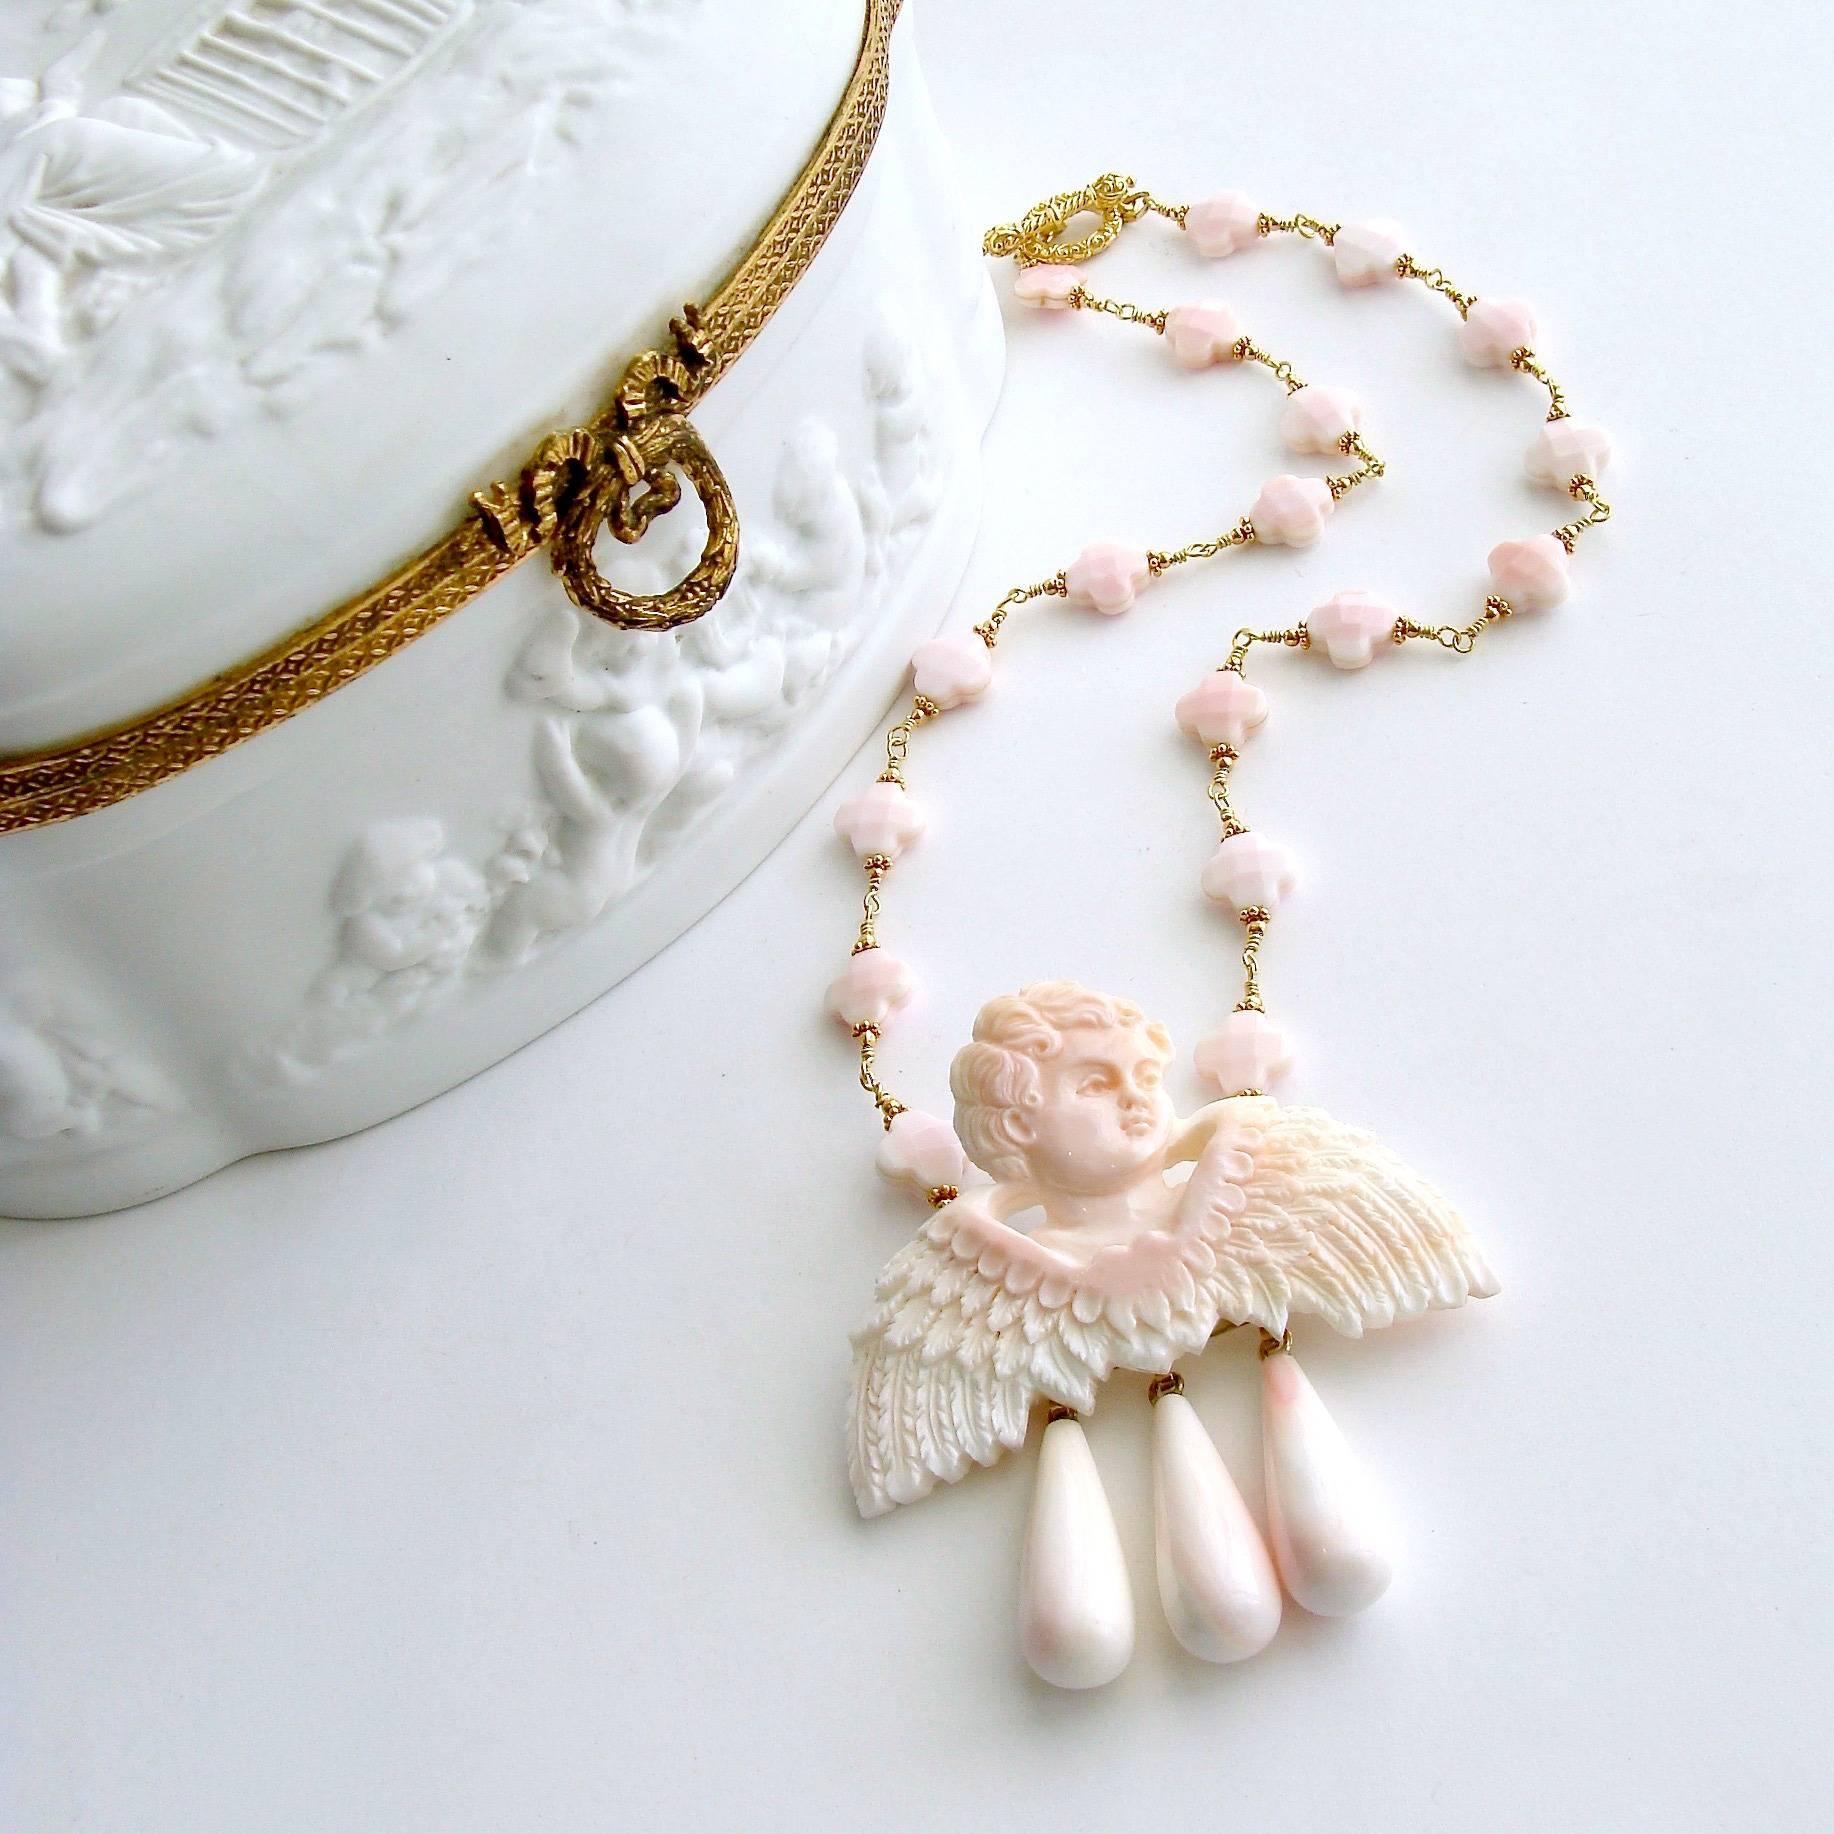 Amorette Necklace.

I have always been a fan of soft blush pink and recently have also become intrigued by little hand carved cherubin.  Since so many of the heirloom cherubs fall into a category that has been banned for sale, my attention has been